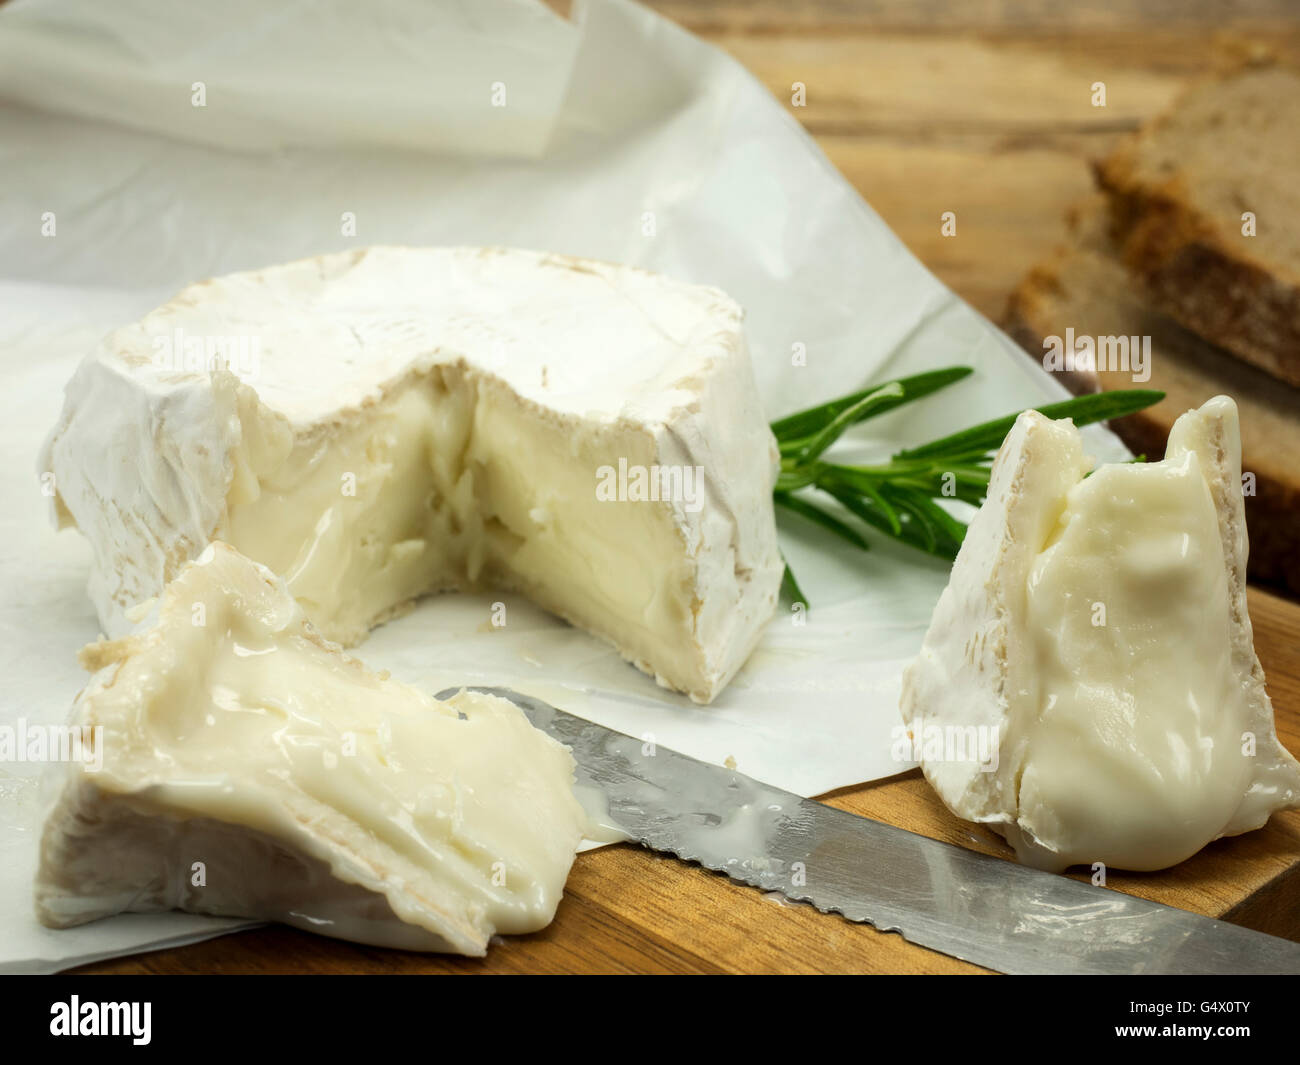 Camembert made from goat's milk Stock Photo